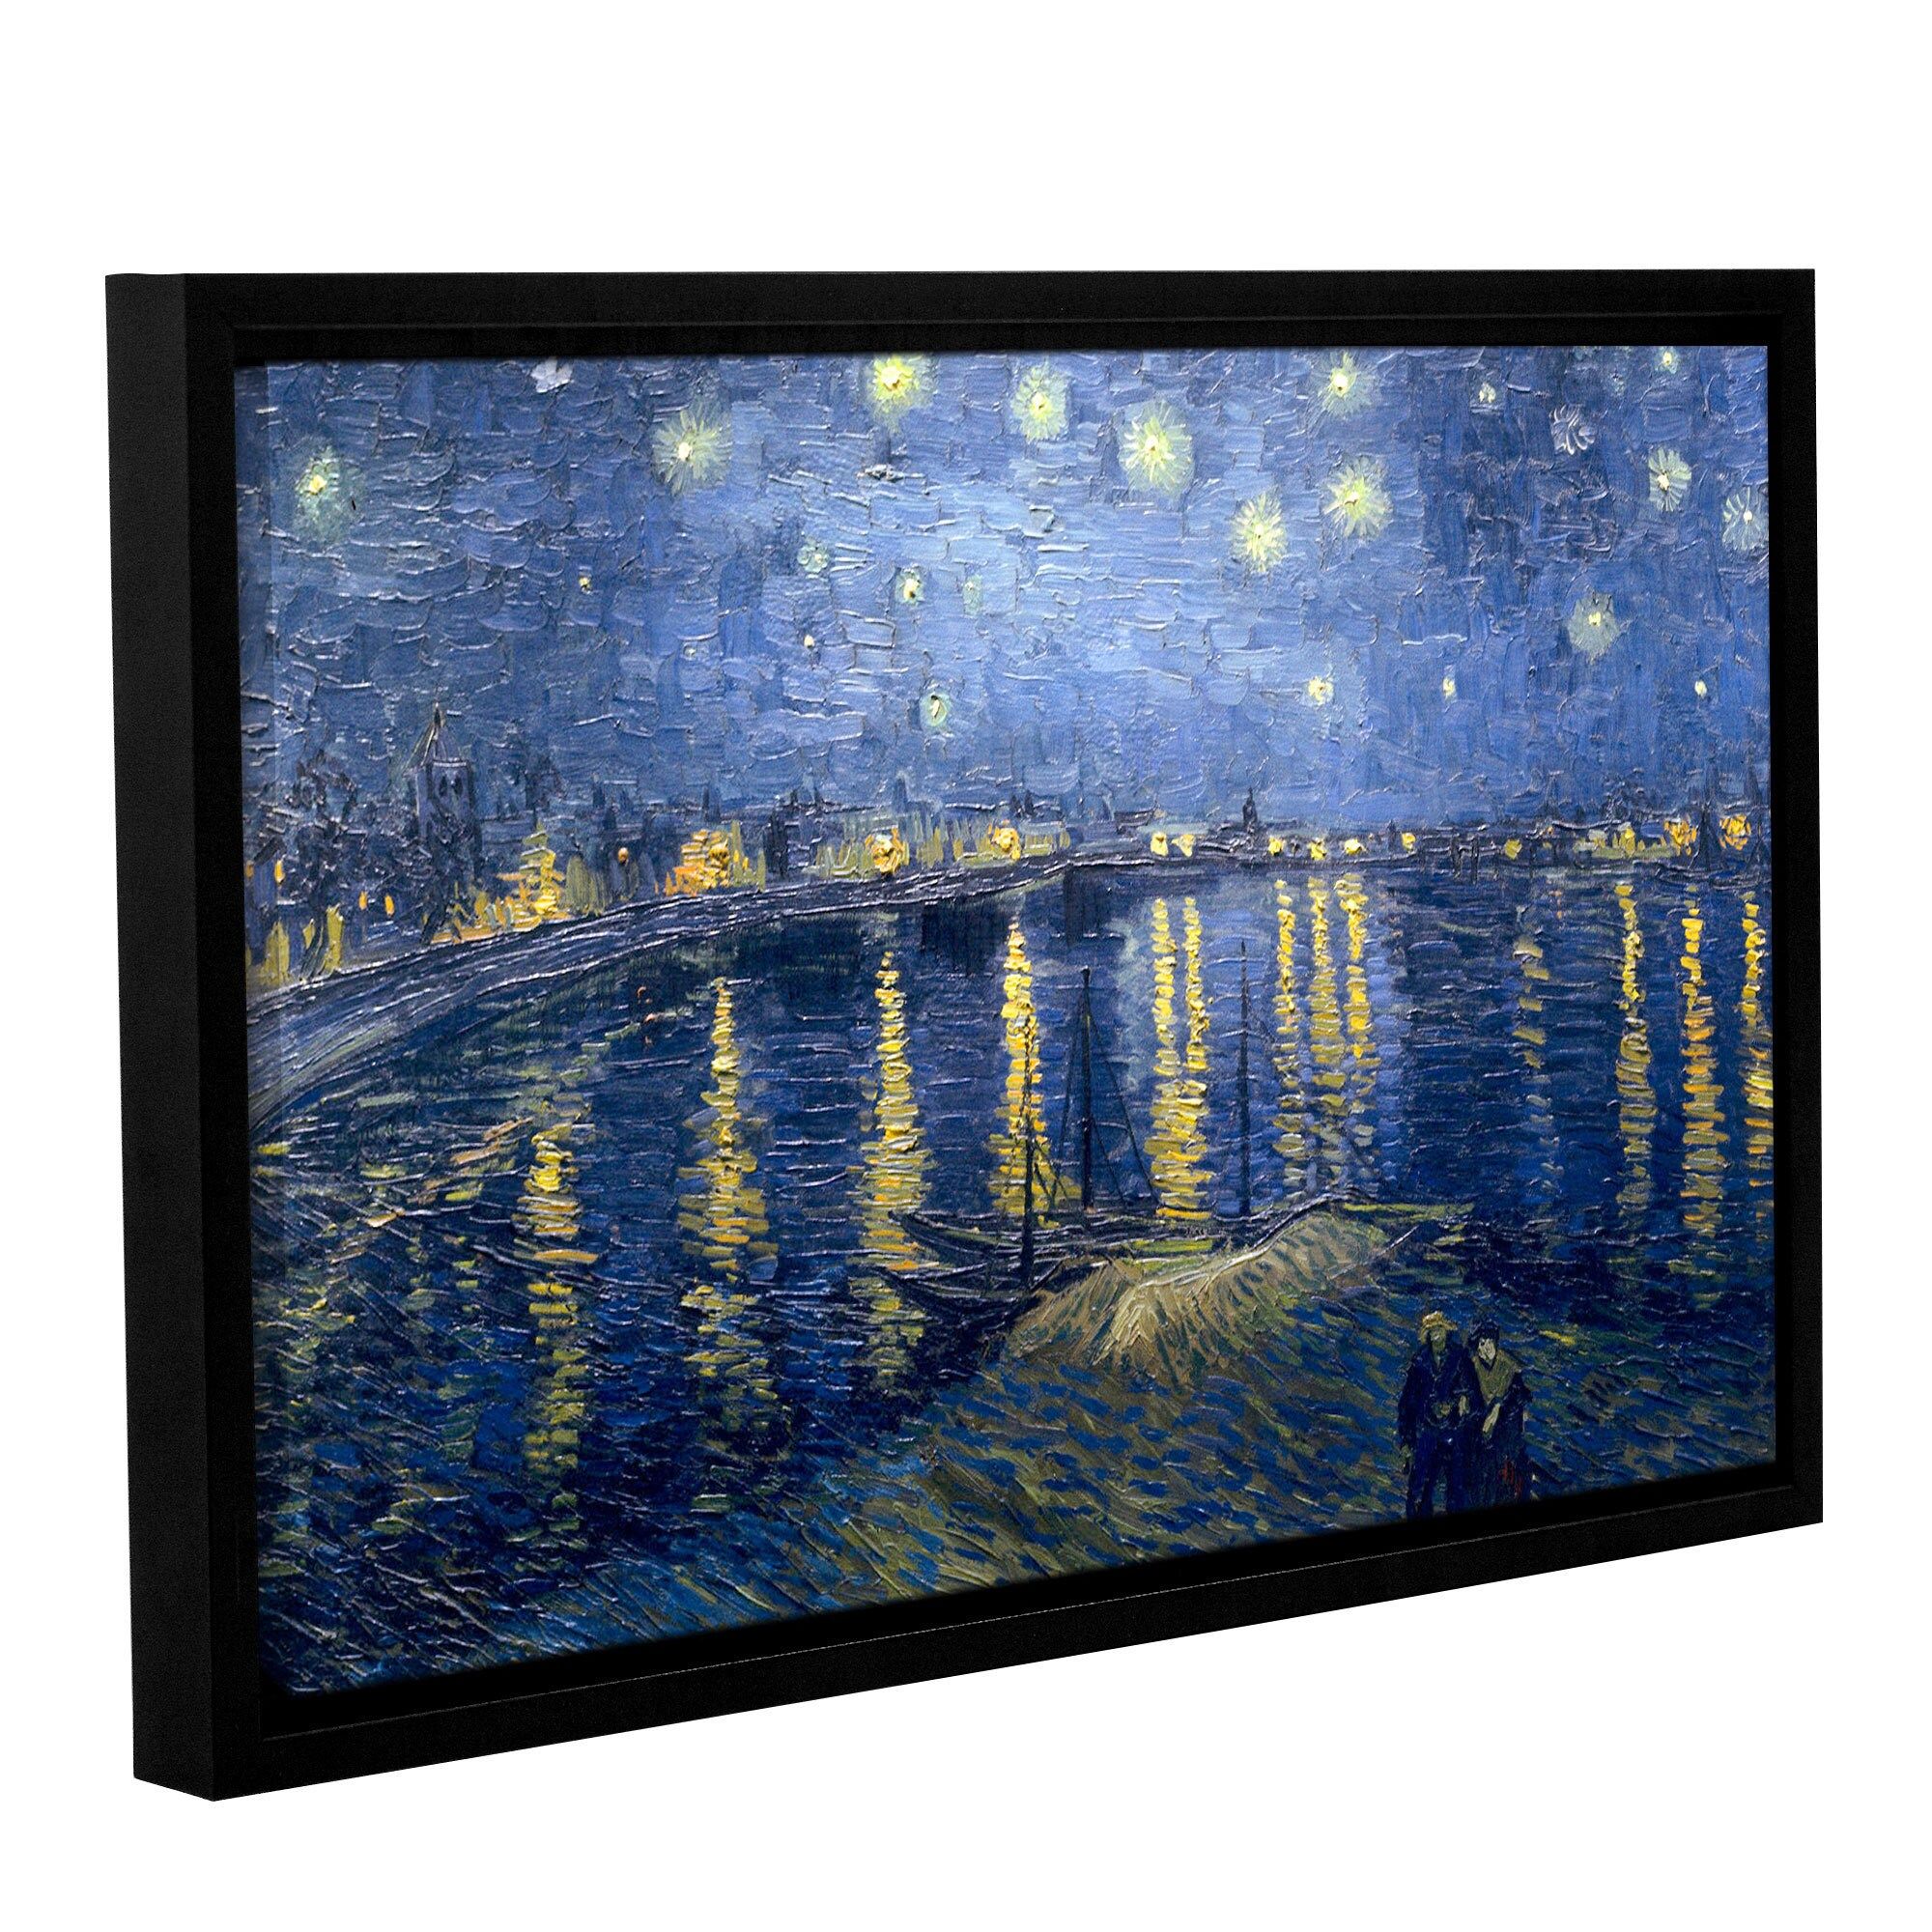 Artwall 'vincent Van Gogh's Starry Night Over The Rhone Intended For Most Recently Released Blended Fabric Van Gogh Starry Night Over The Rhone Wall Hangings (Gallery 2 of 20)